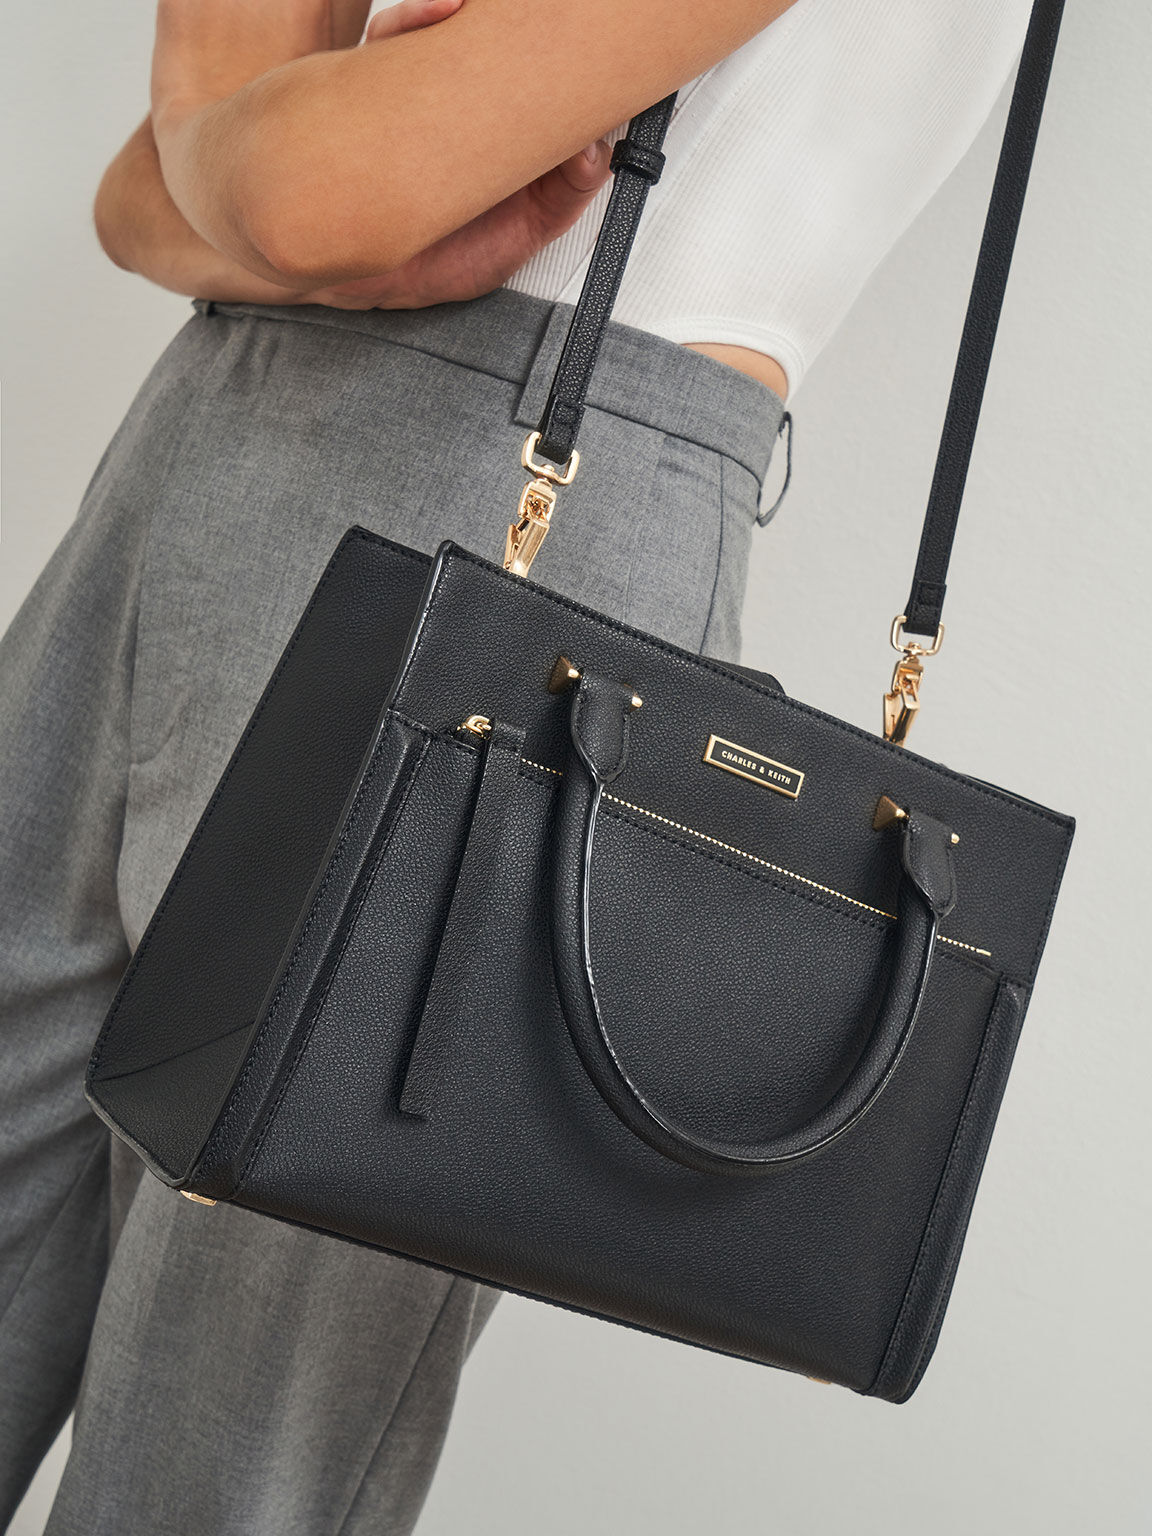 TÚI CHARLES KEITH DOUBLE HANDLE FRONT ZIP TOTE BAG 6